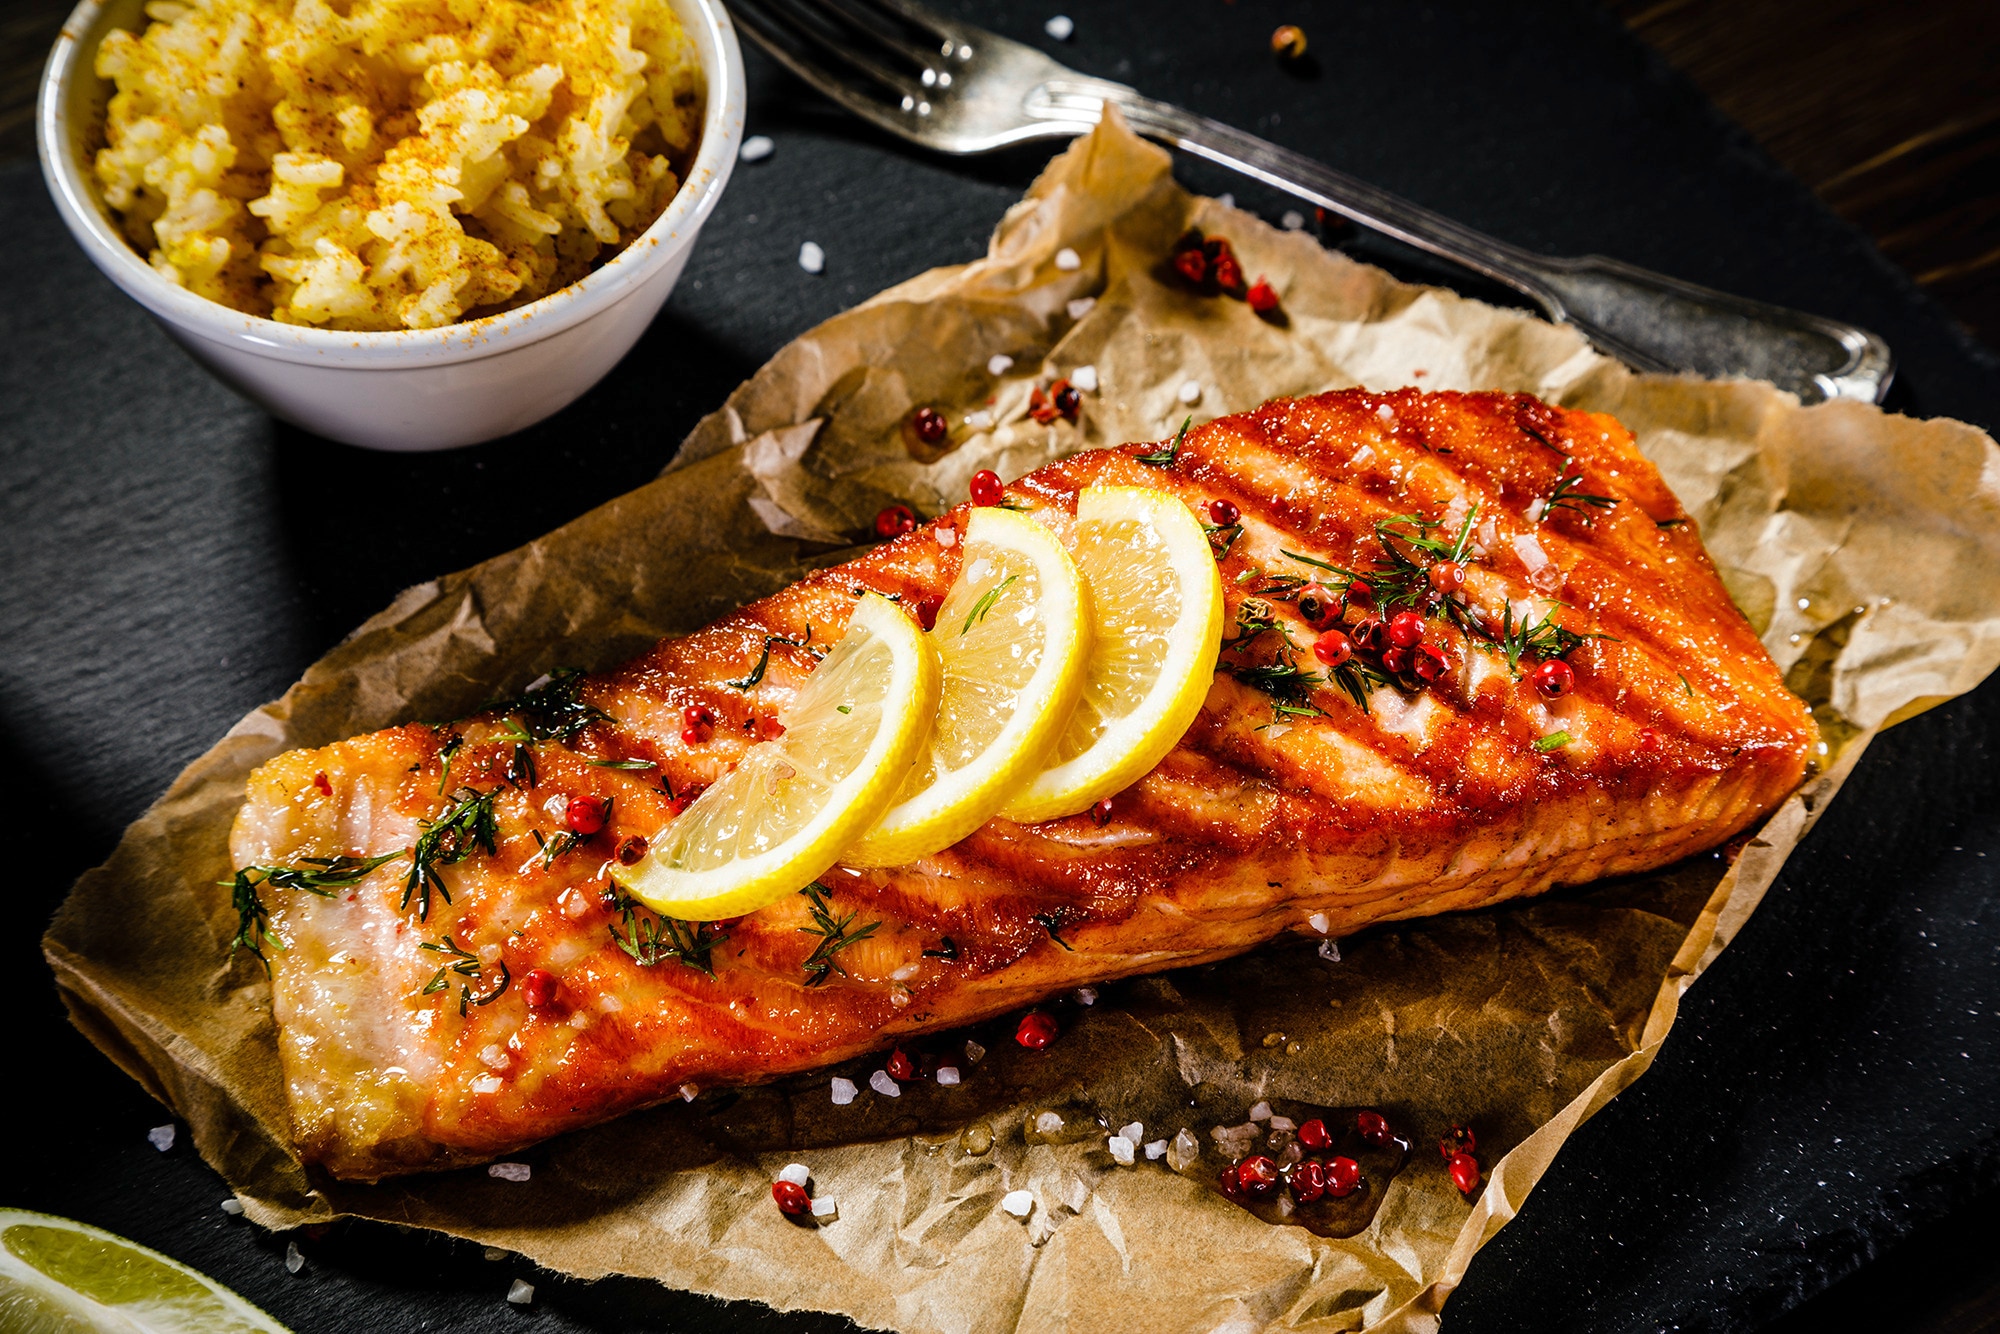 A baking tray with grilled salmon topped with herbs, spices, and lemon slices